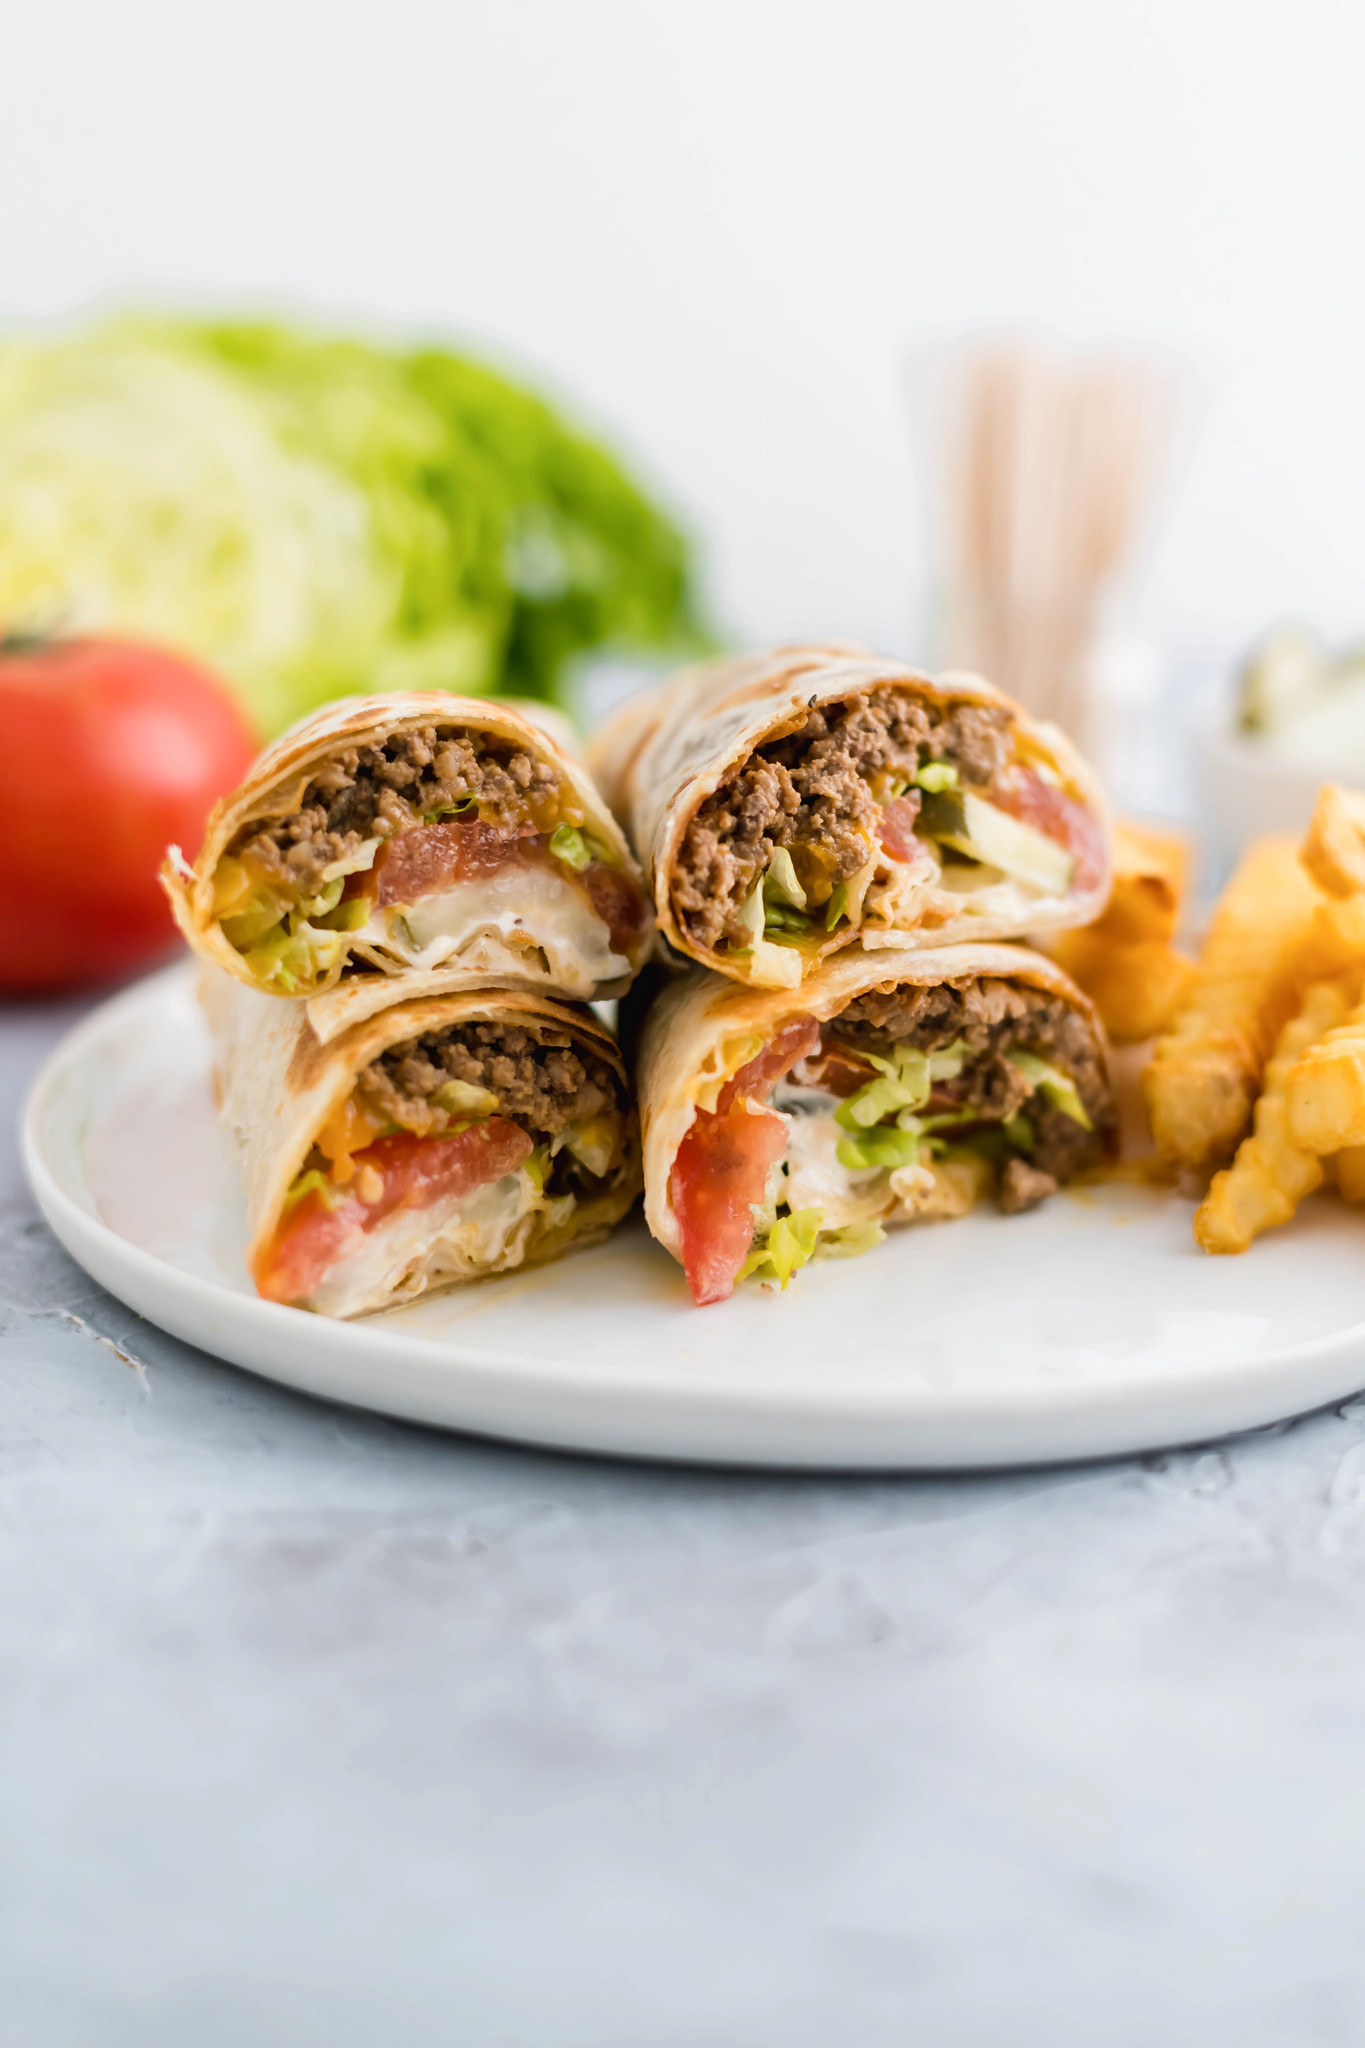 A fun twist on the classic cheeseburger, these Cheeseburger Wraps feature ground beef, cheese, burger sauce, lettuce, tomato and pickles all wrapped up in a flour tortilla.